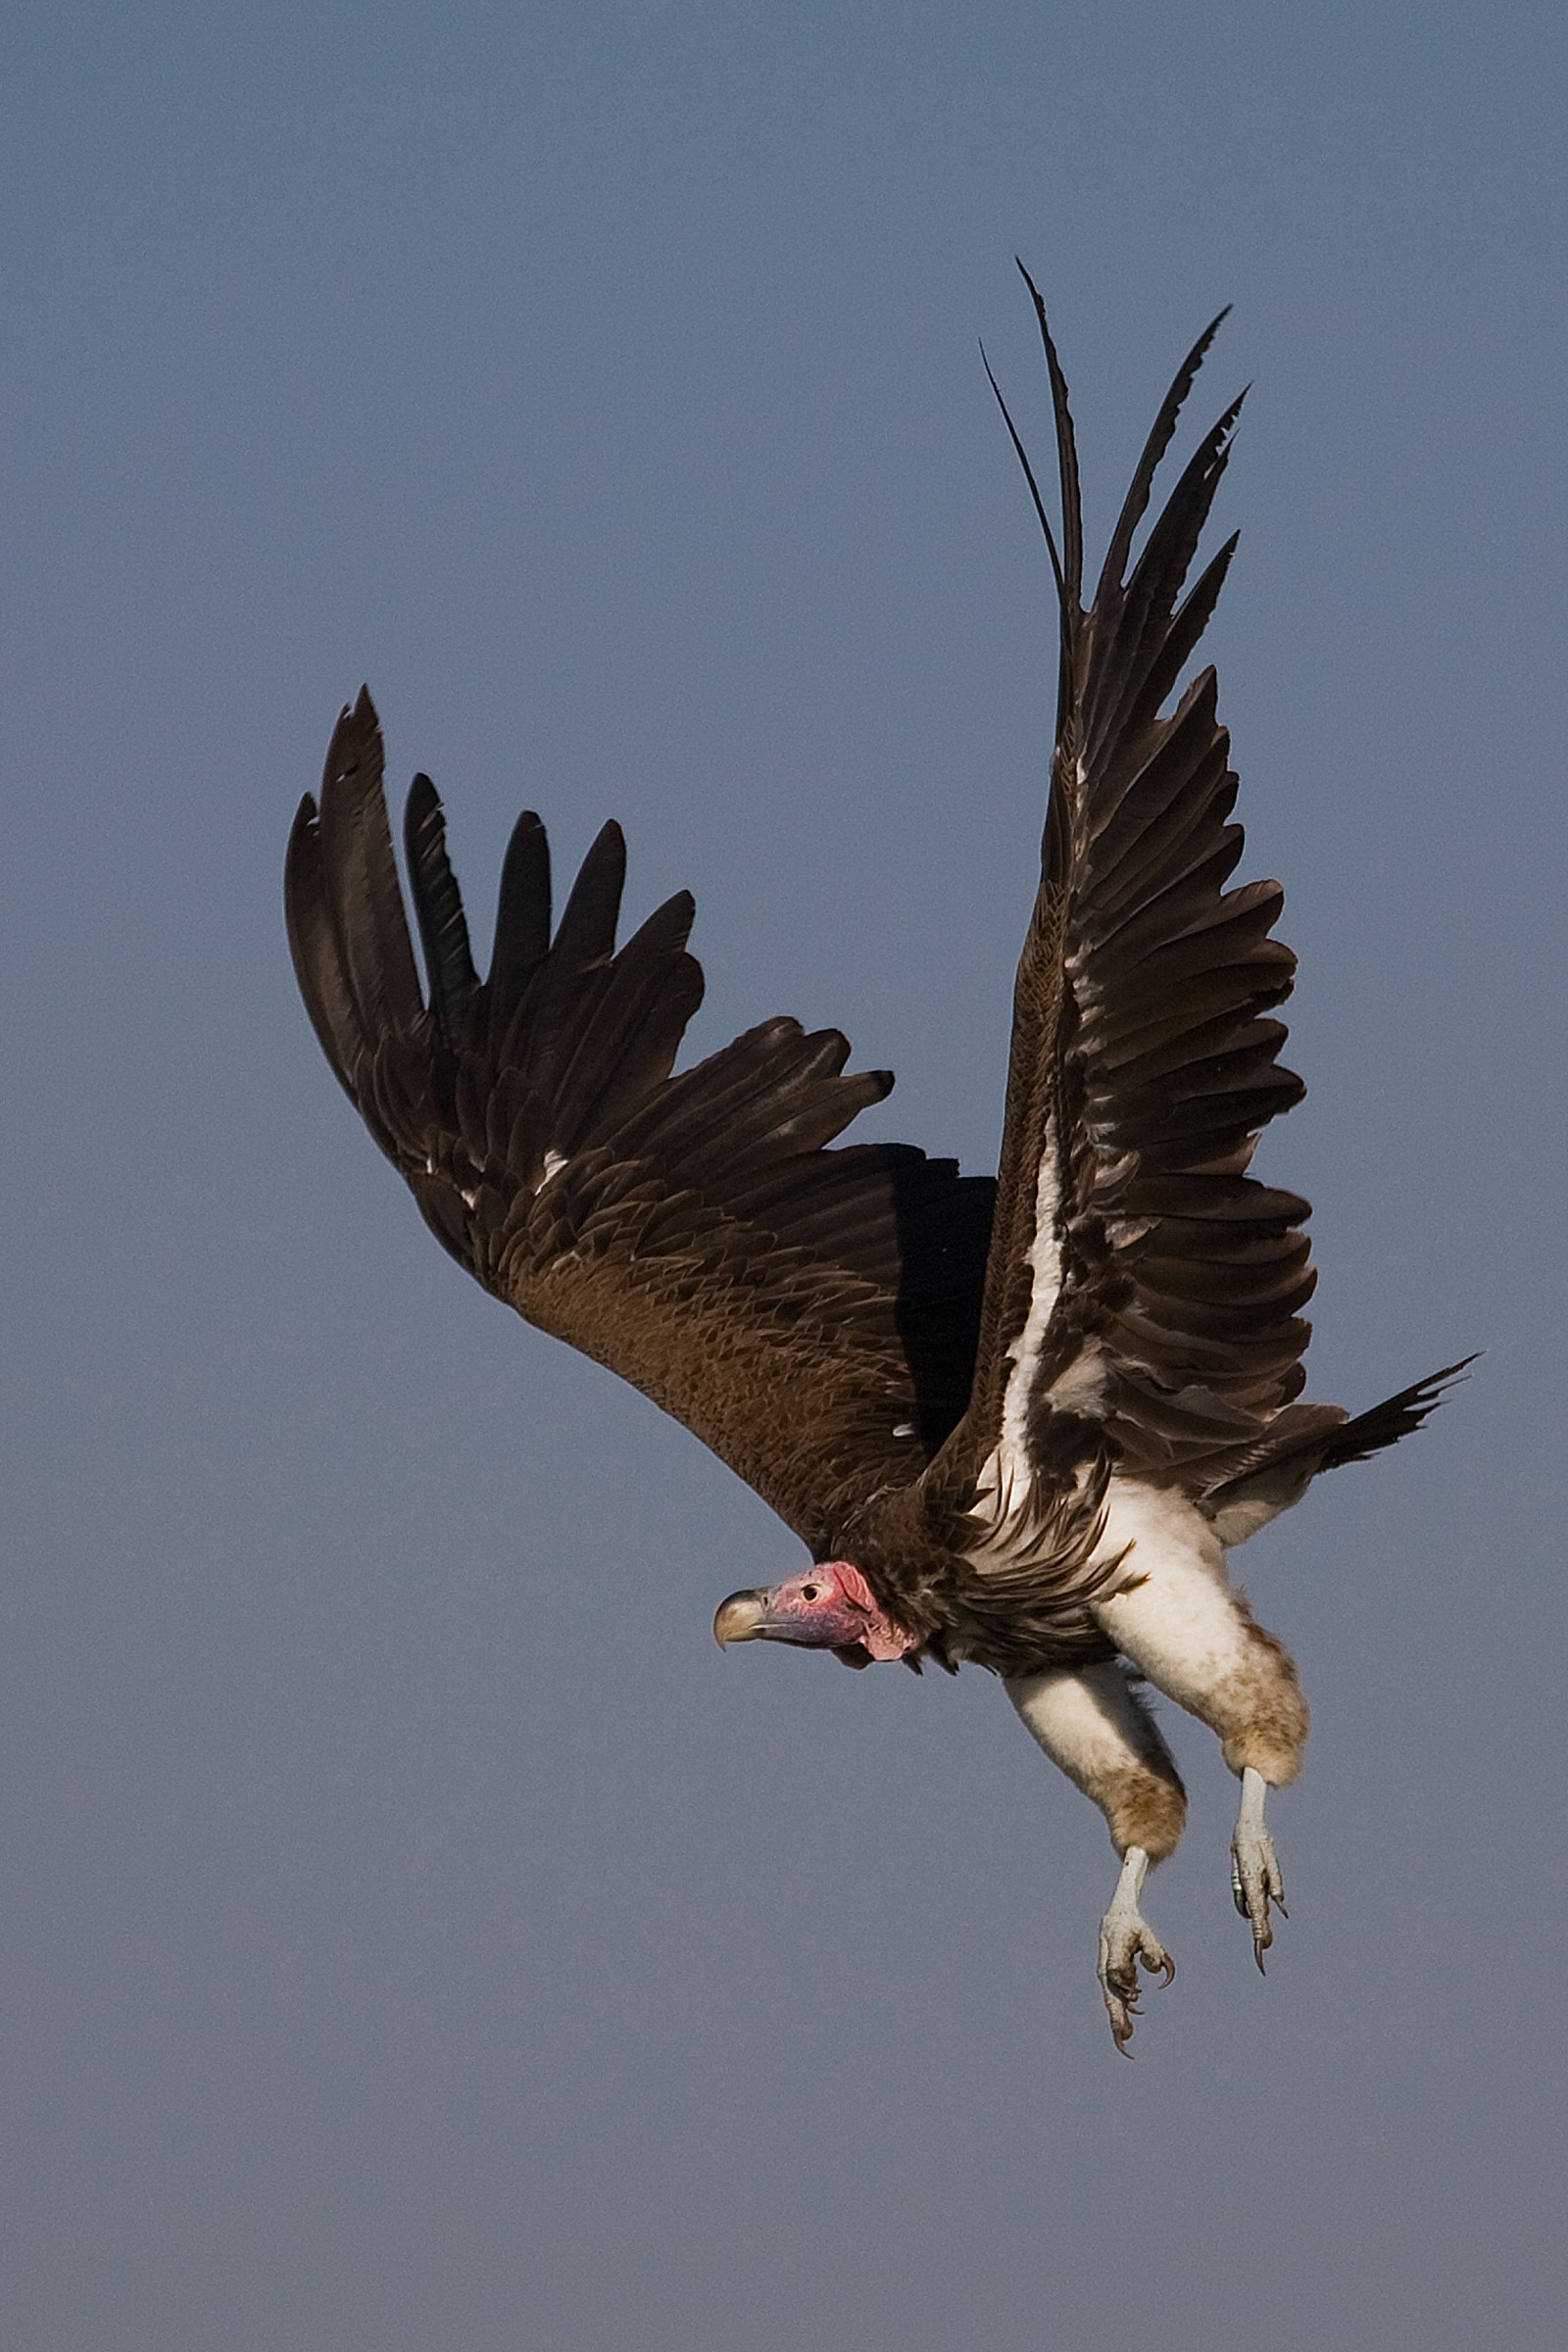 lapped faced vulture...